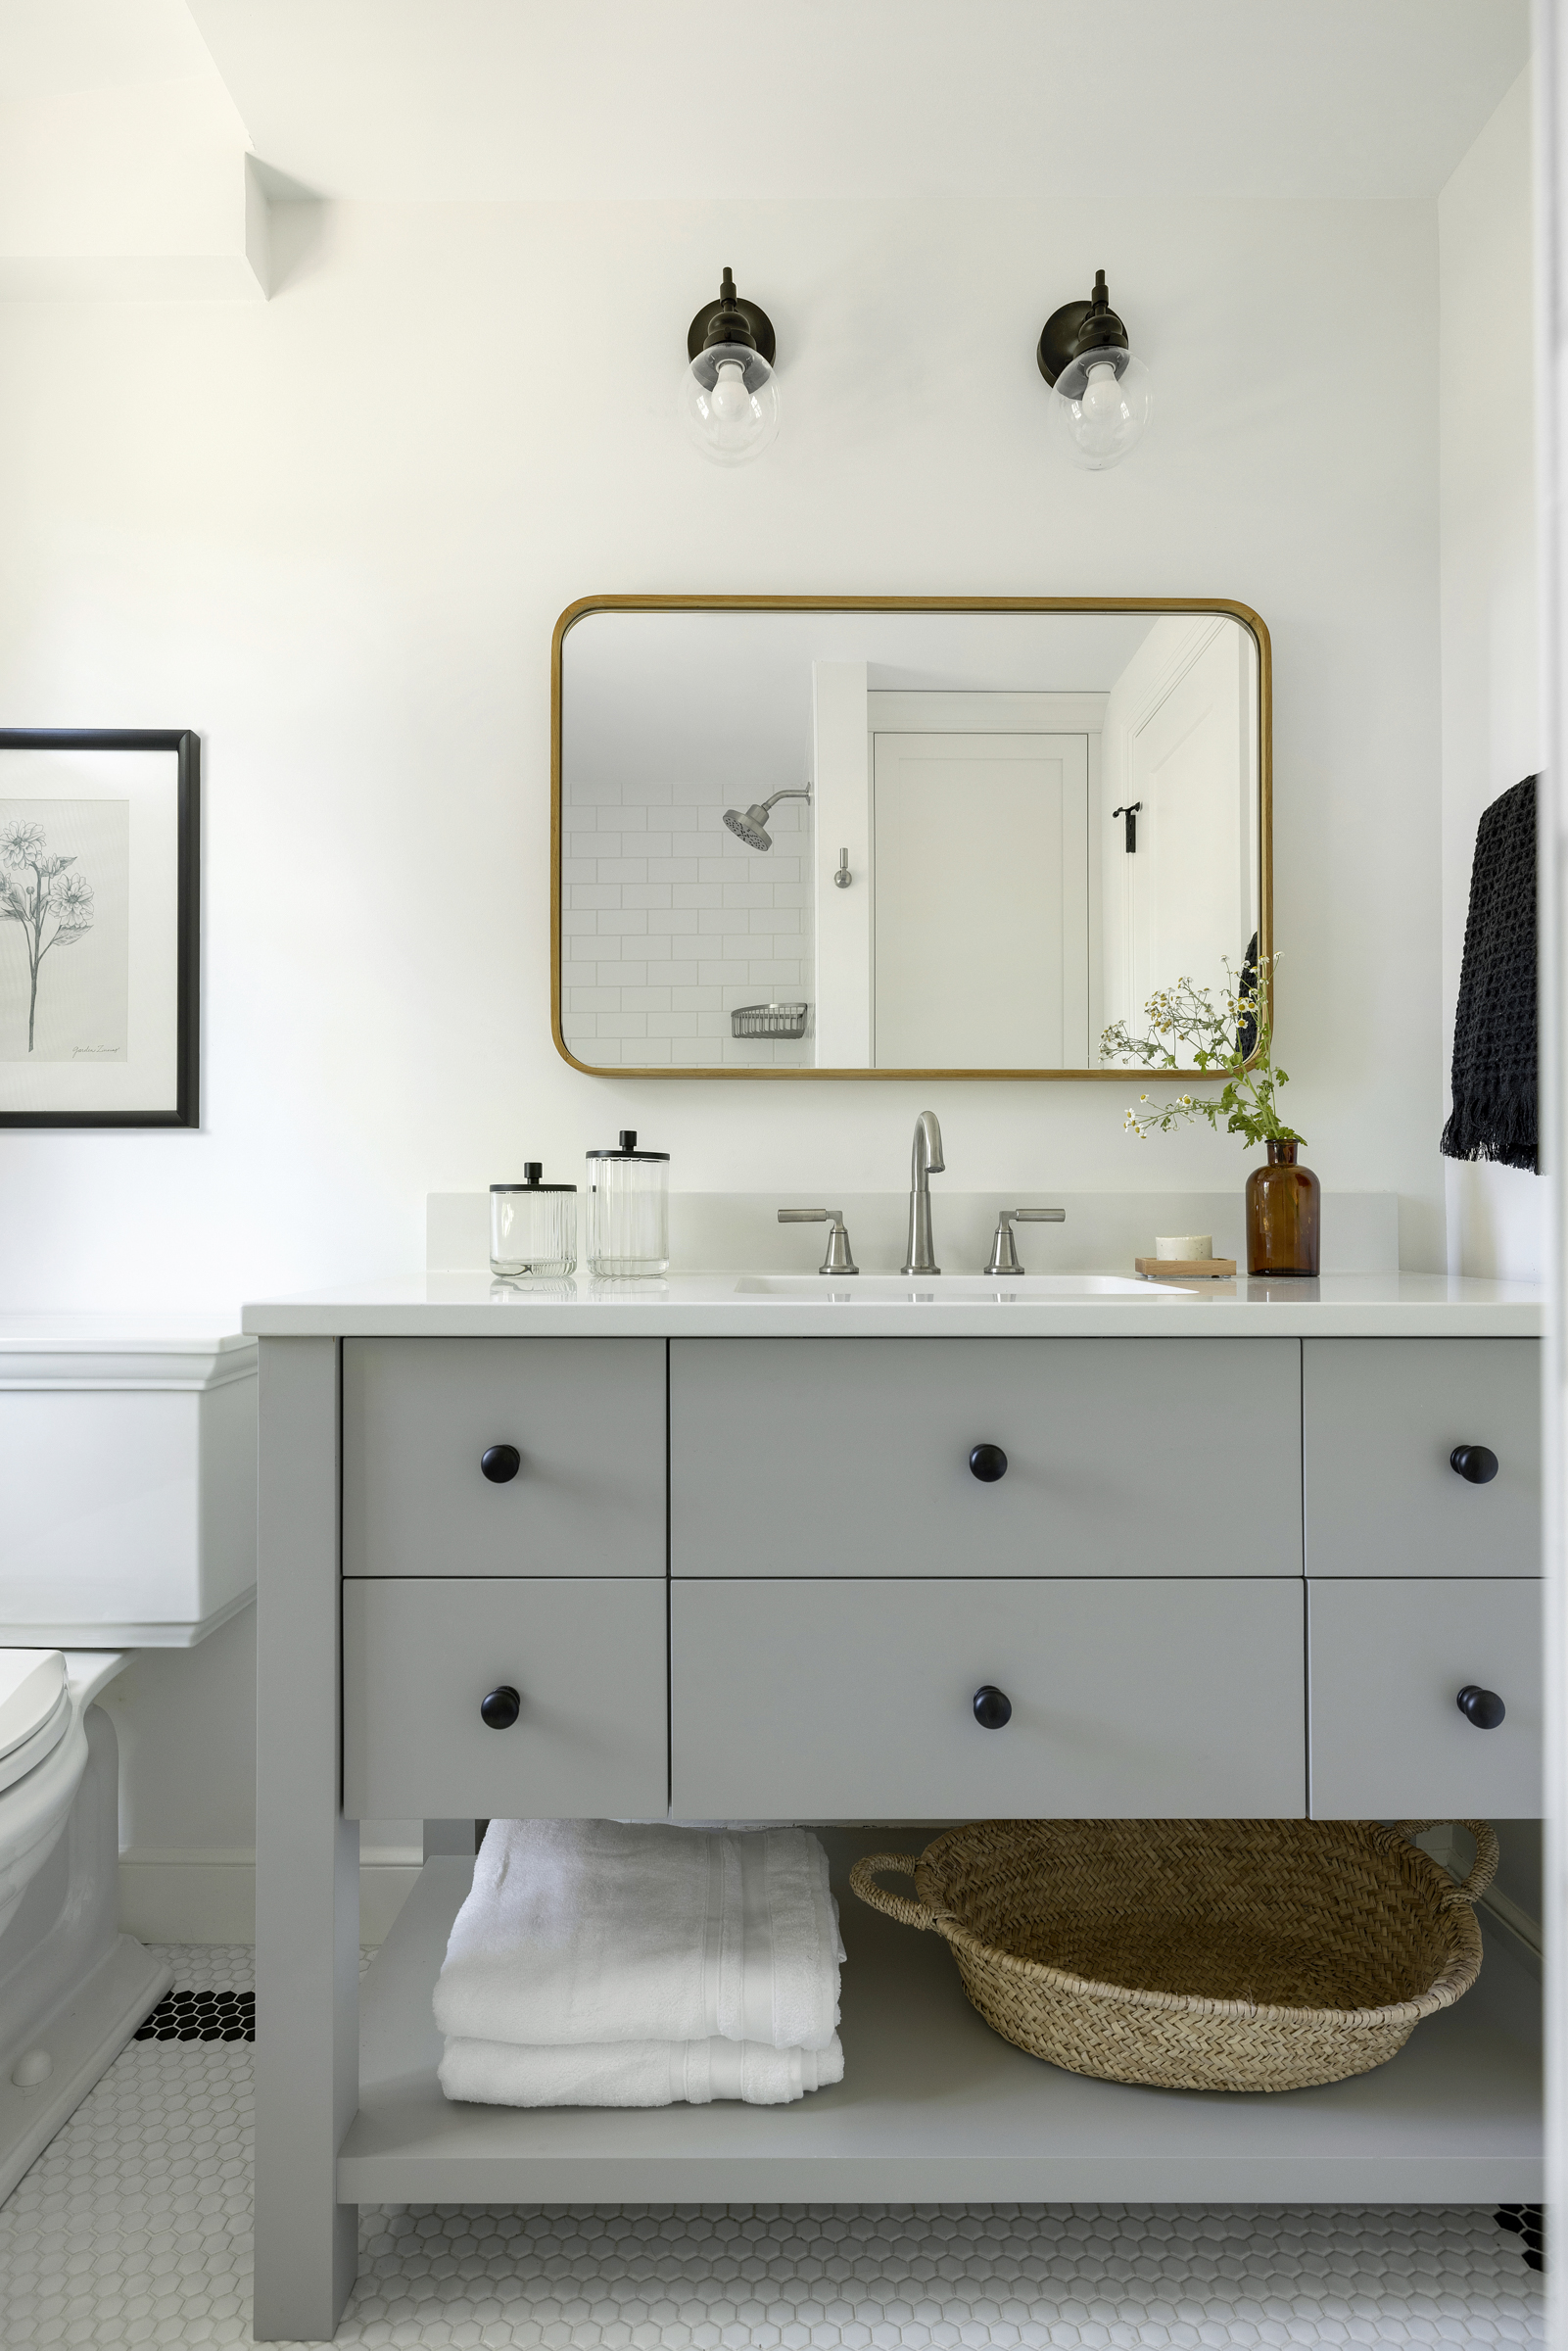 Arden vanity in 50 Shades grey with brass and black accents